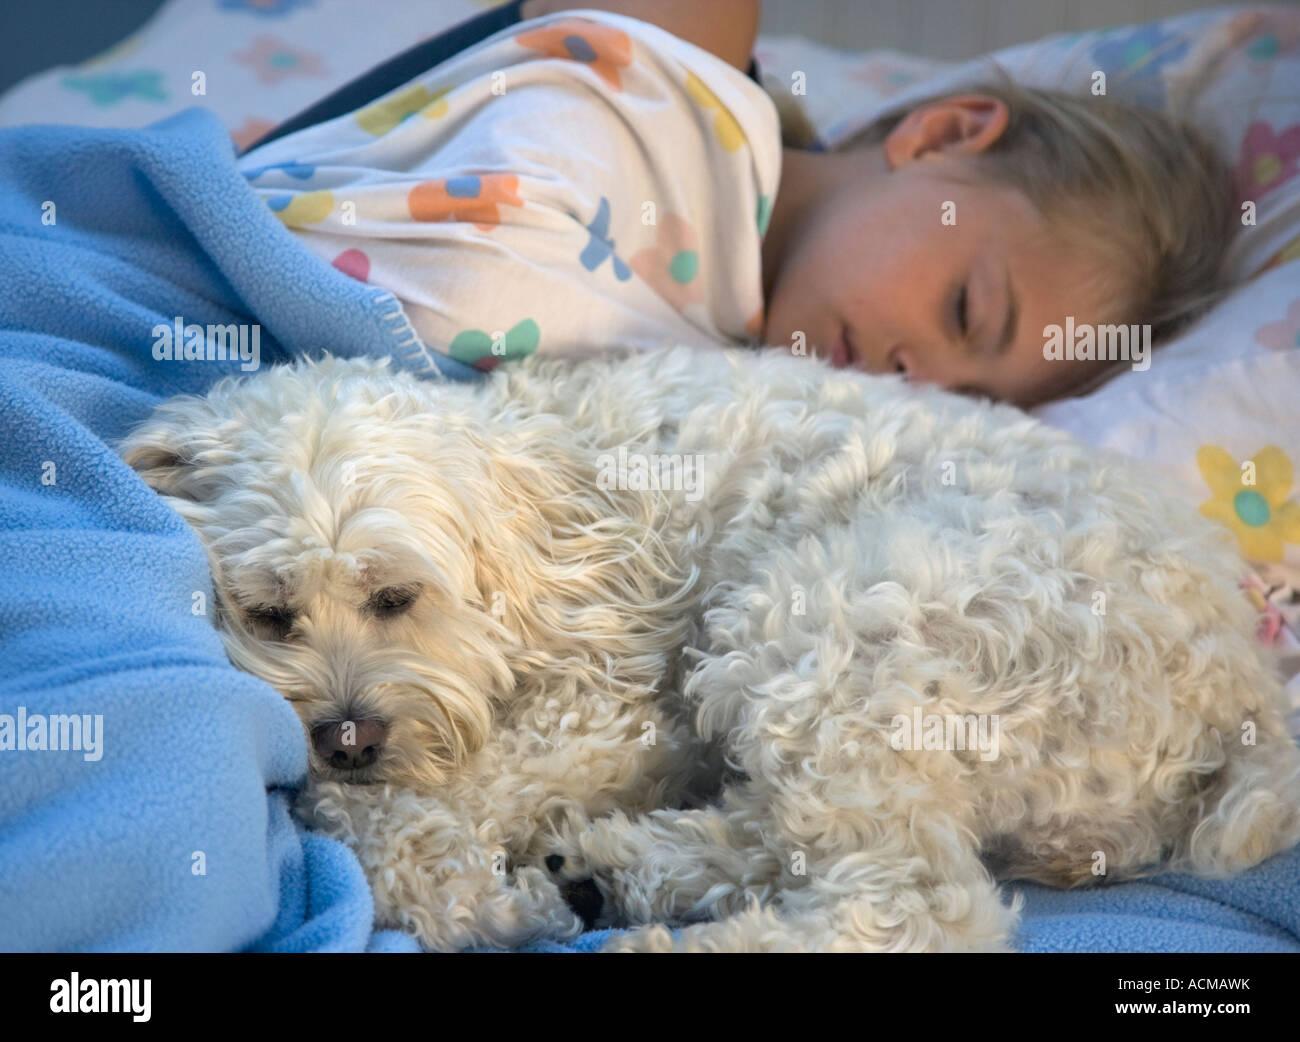 Child sleeping with her pet dog Stock Photo